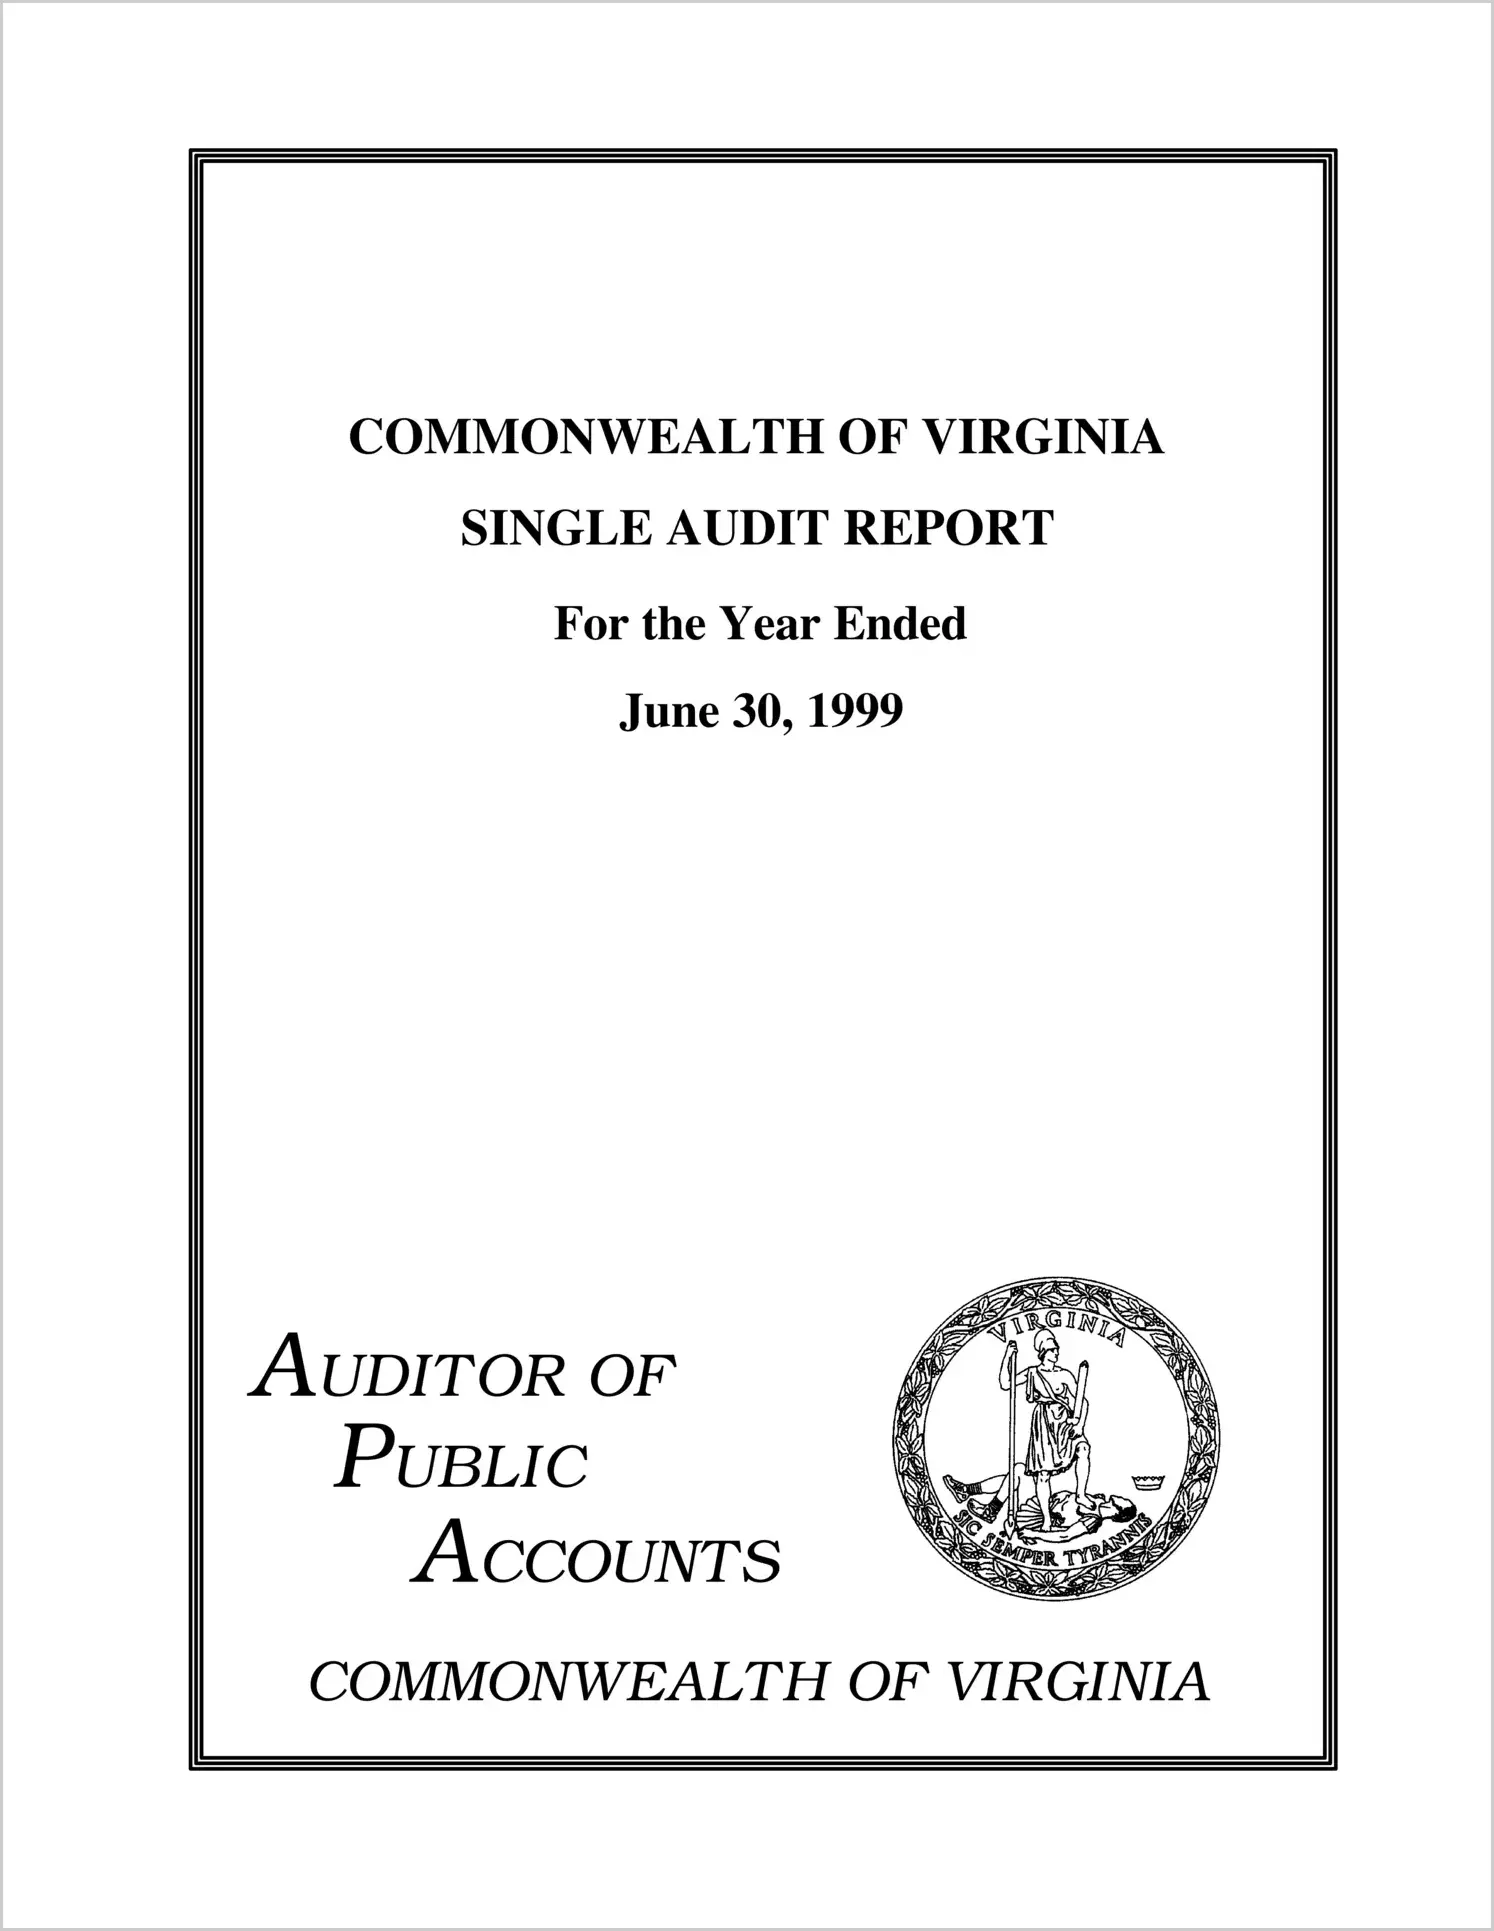 Commonwealth of Virginia Single Audit Report for the Year Ended June 30, 1999